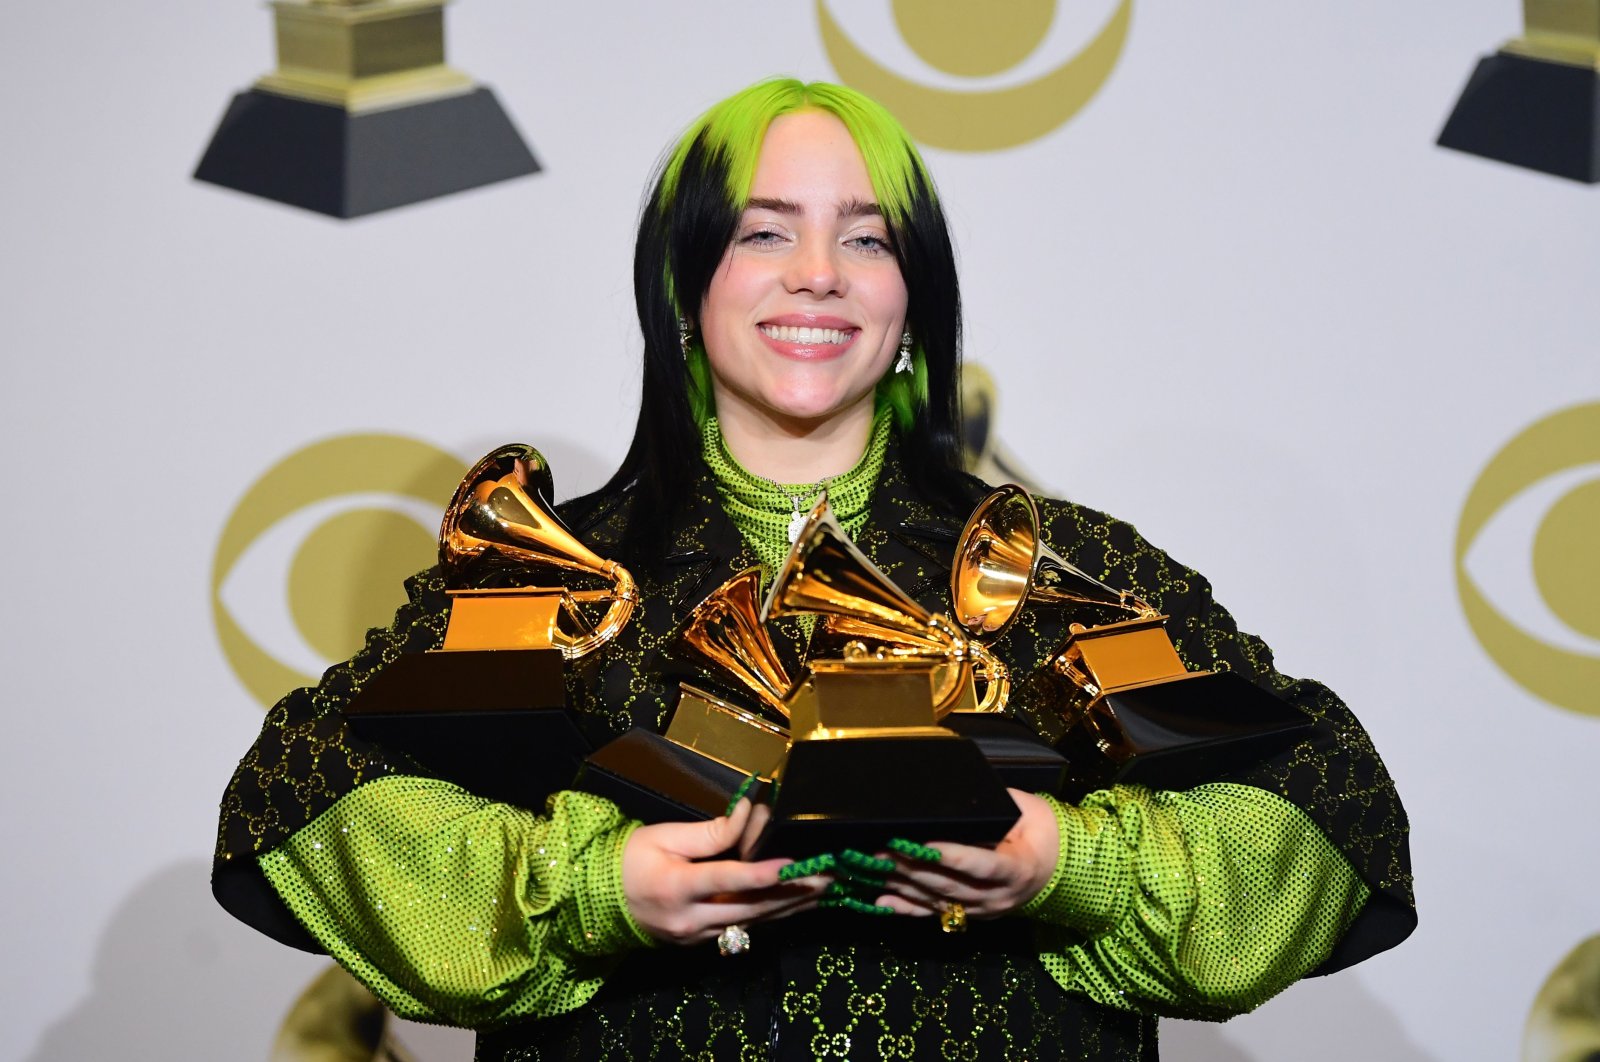 American singer-songwriter Billie Eilish poses in the press room with the awards she won during the 62nd Annual Grammy Awards in Los Angeles, CA, U.S., on Jan. 26, 2020. (AFP Photo)